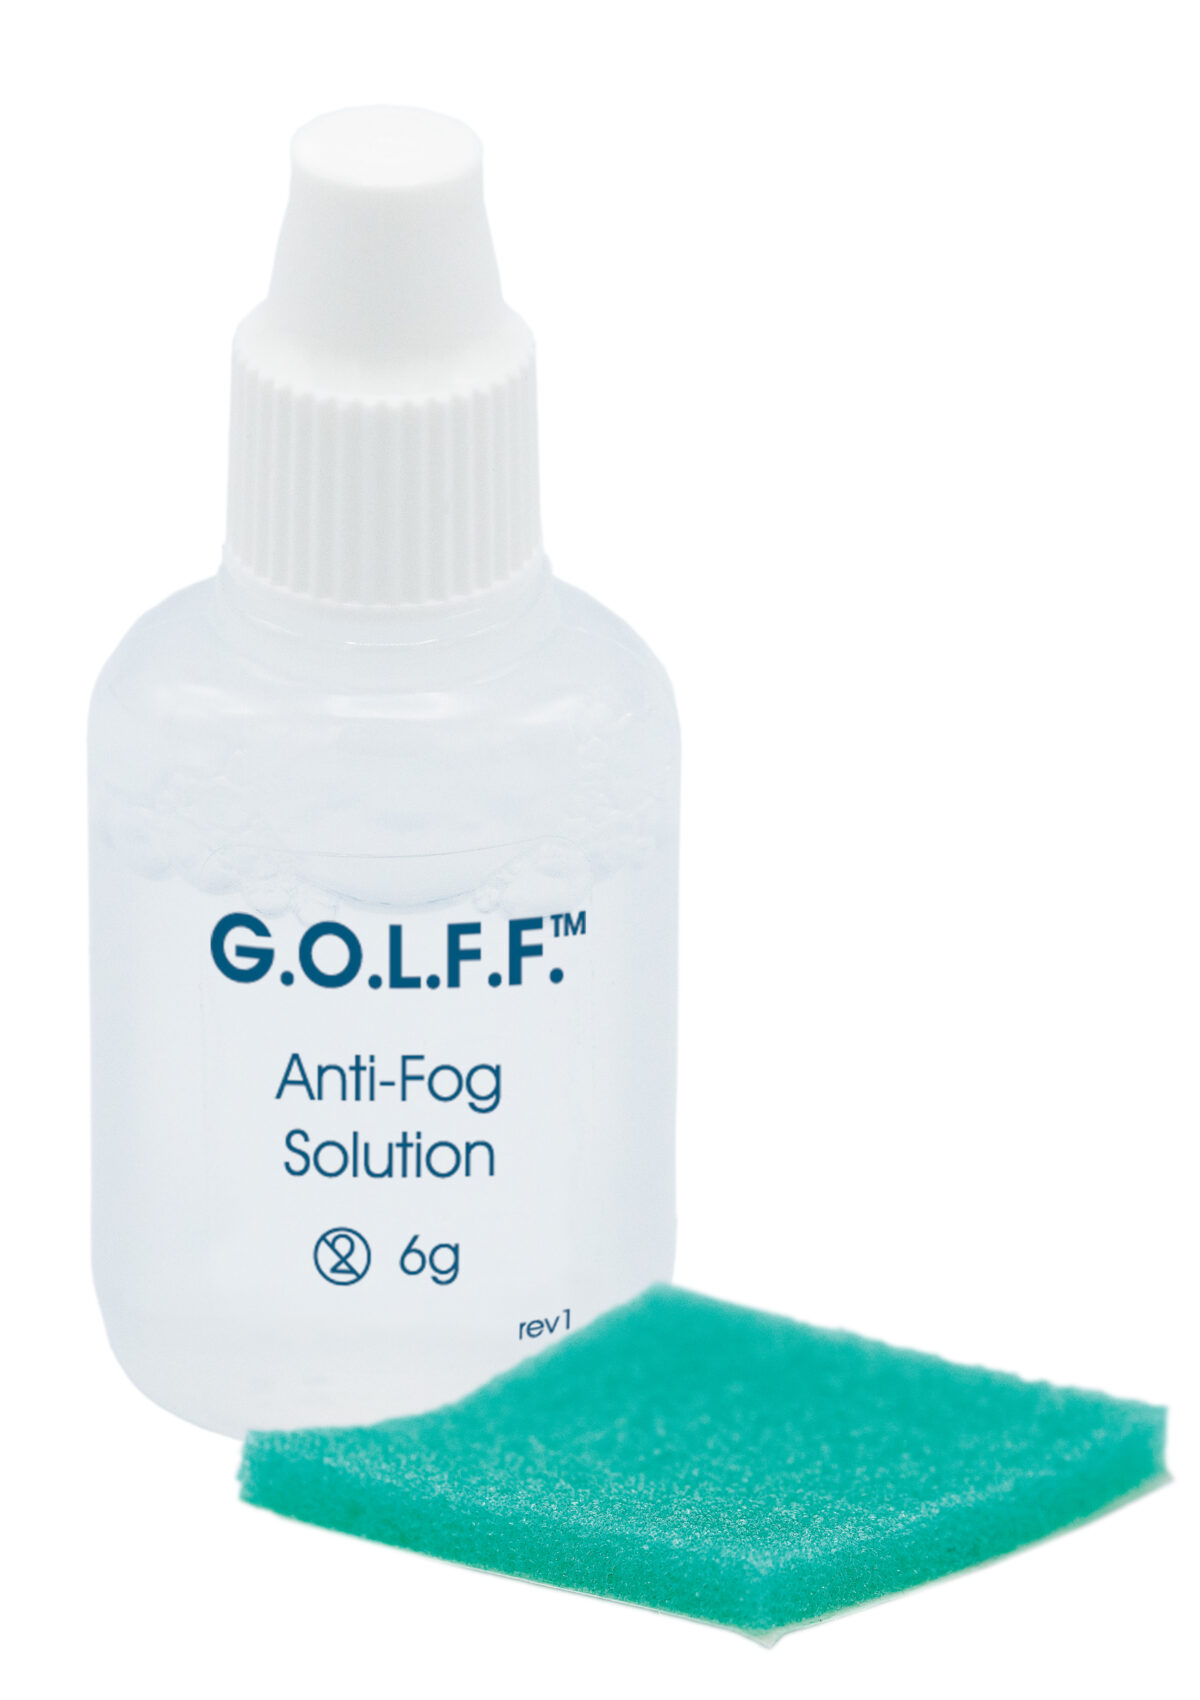 G.O.L.F.F.™ Anti-Fog Solution with adhesive back sponge, designed to prevent fog from forming on endoscopic camera lenses during surgical procedures.